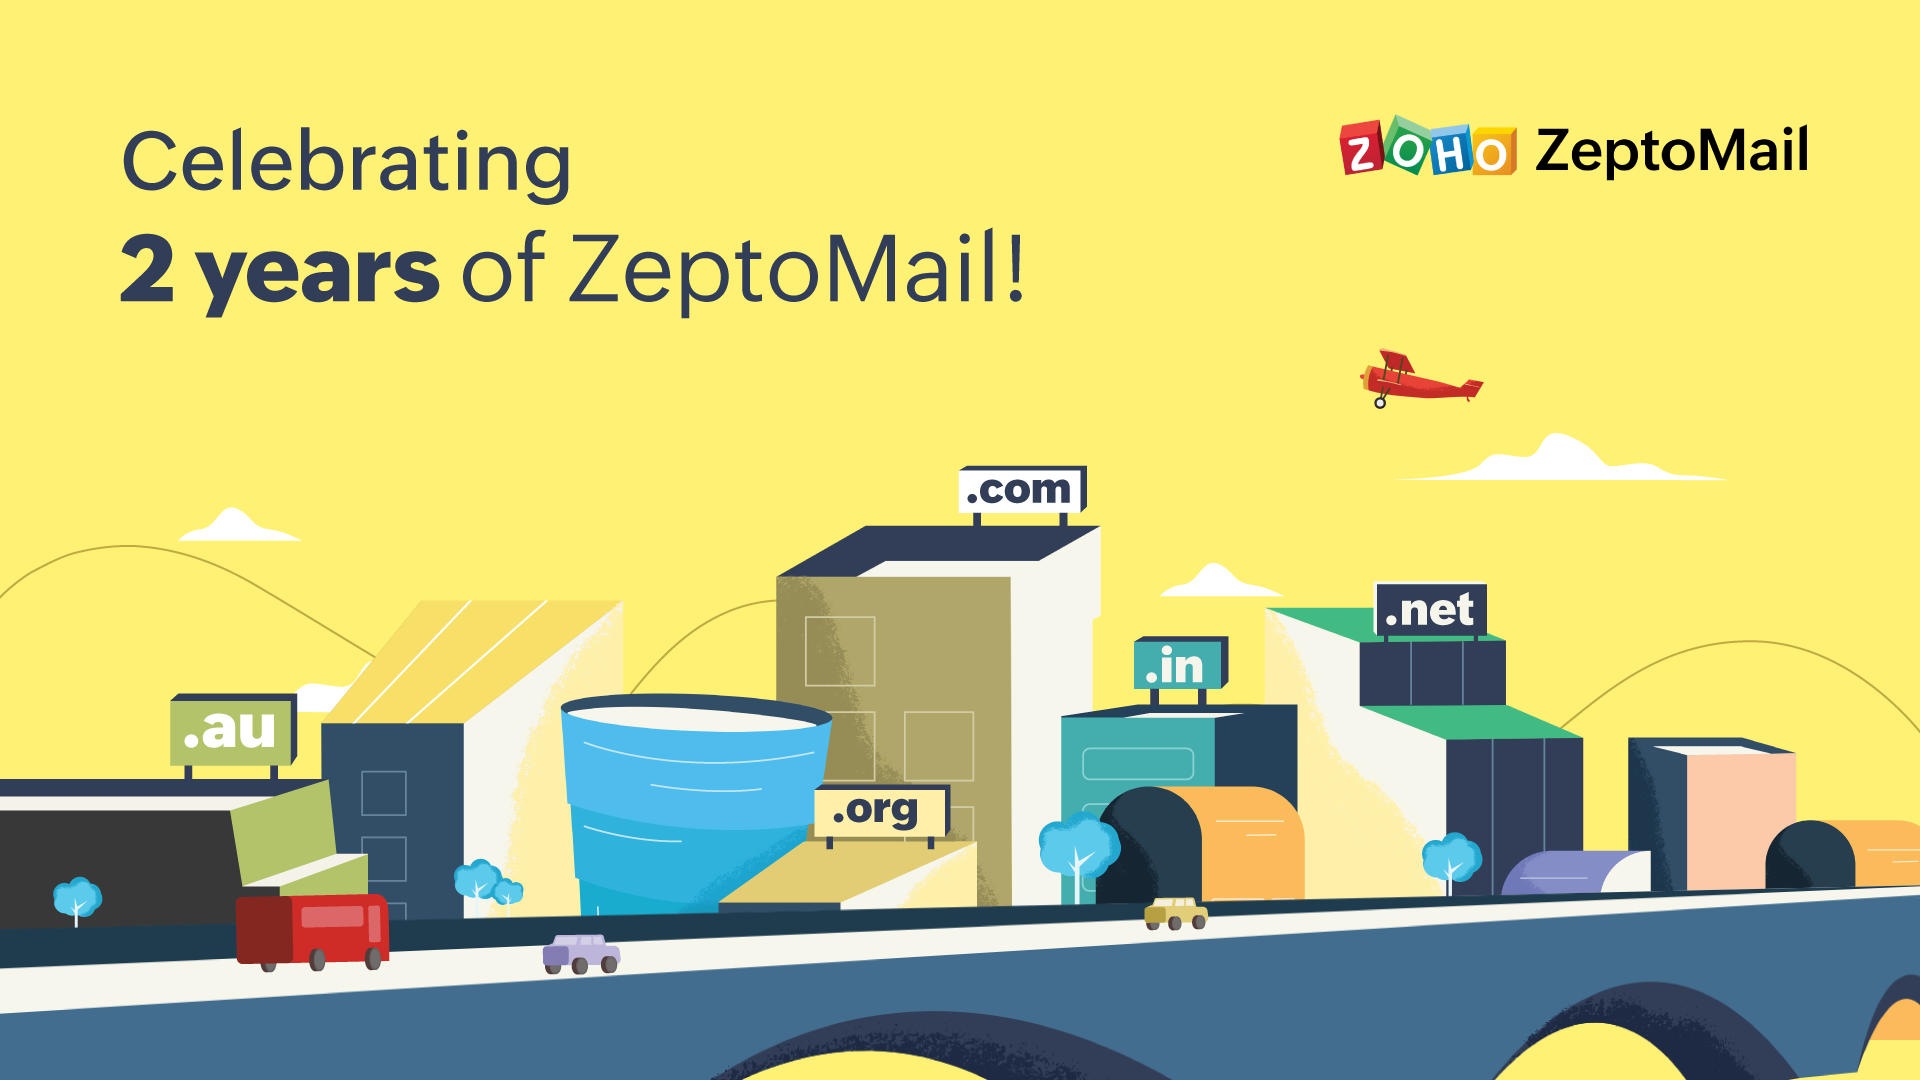 Celebrating two years of ZeptoMail with an all-new look!